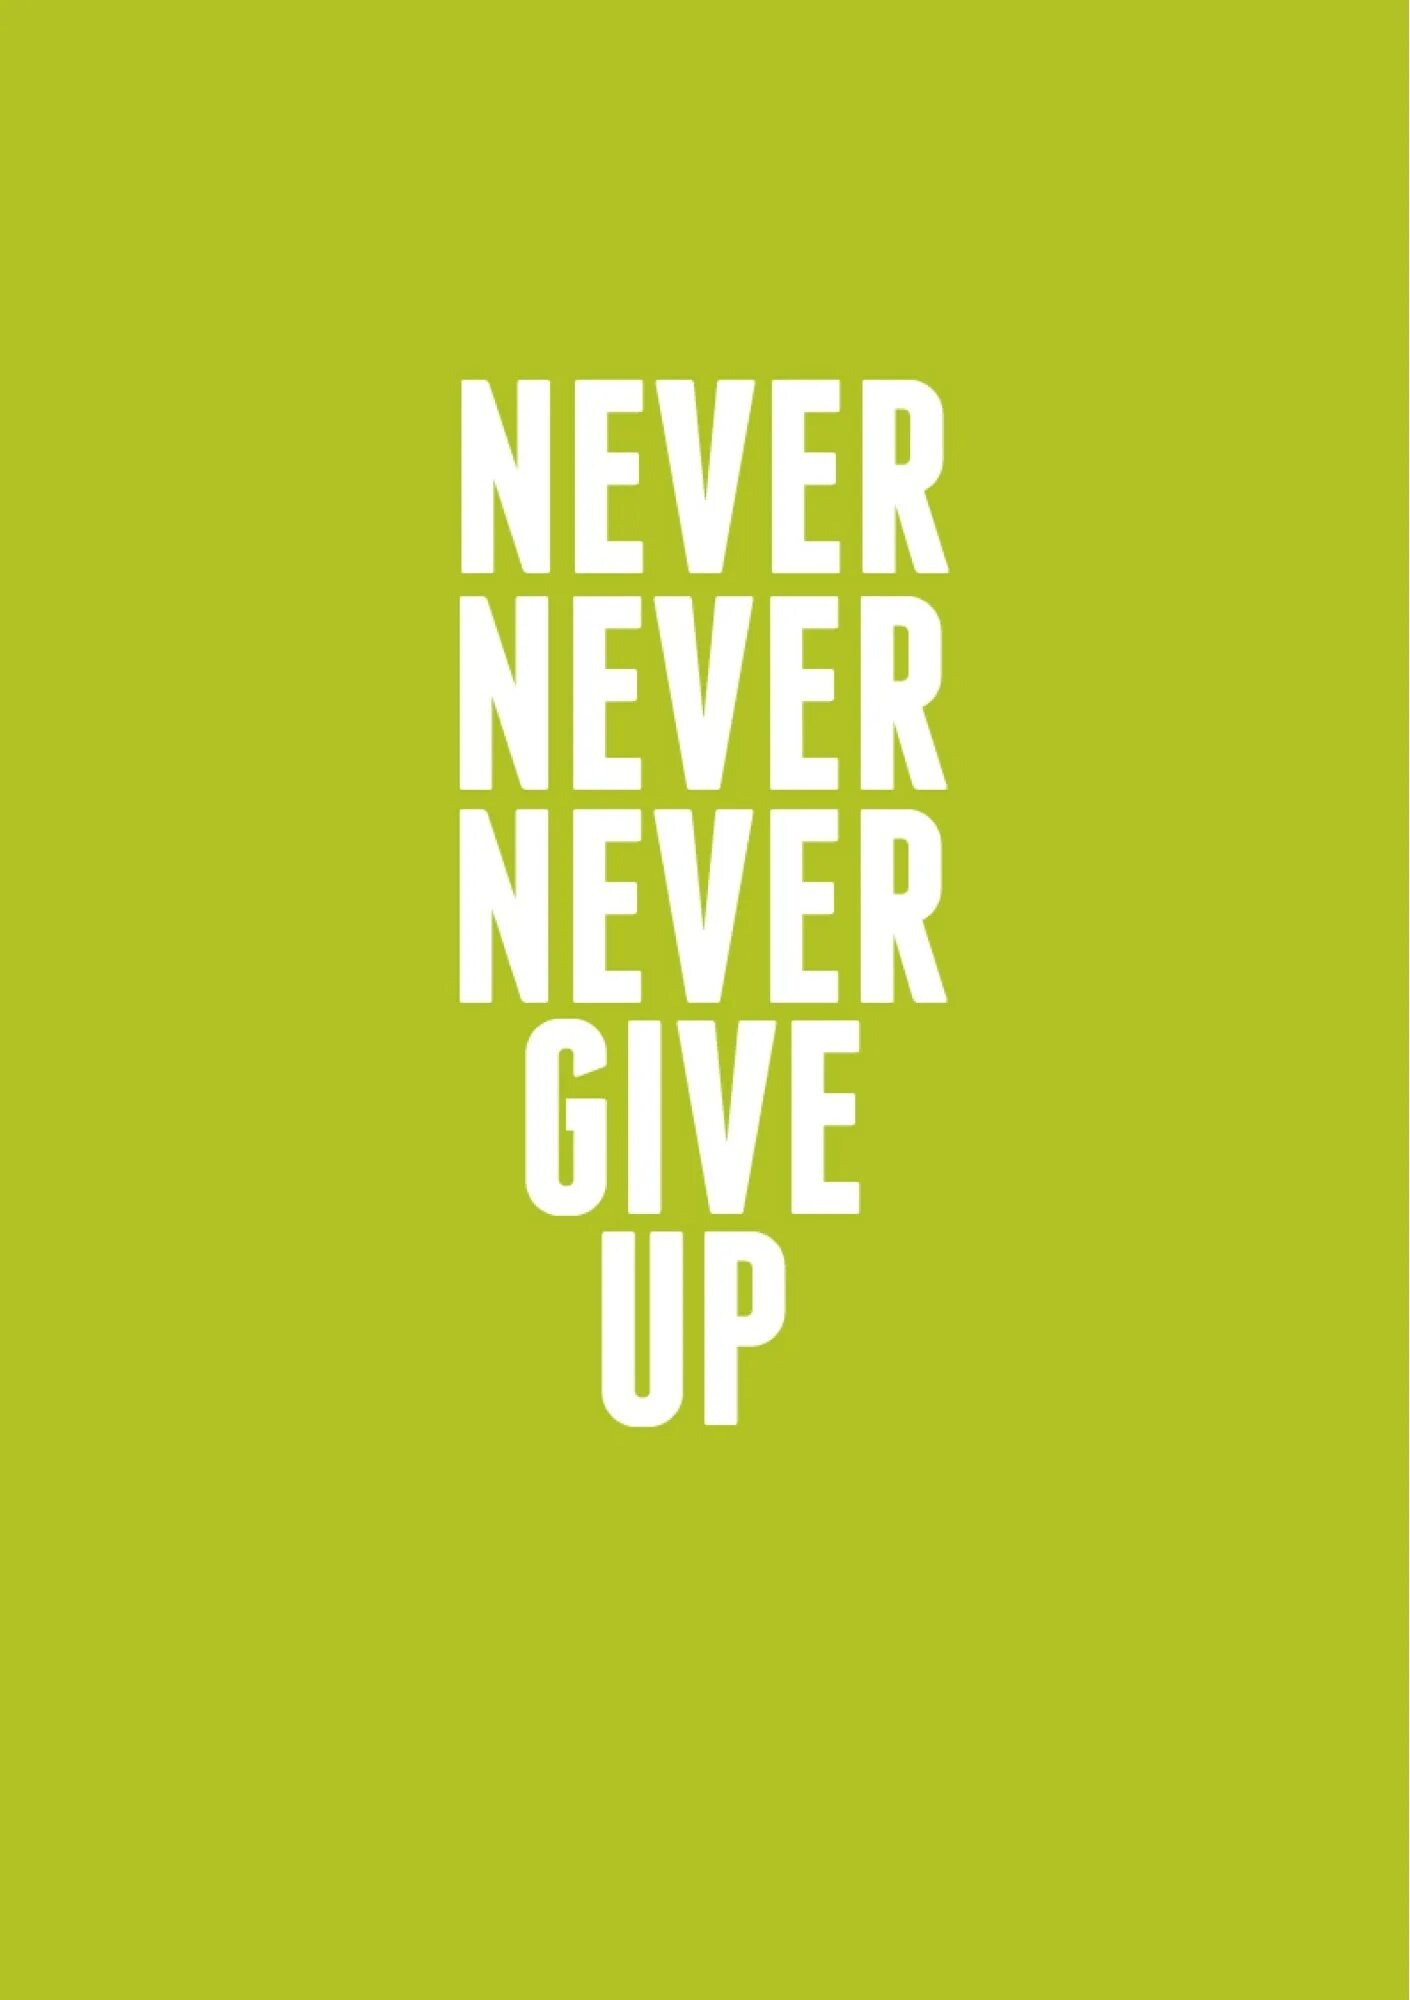 Never never seen since. Never give up. Never give up Постер. Never never never give up. Обои с надписью never give up.